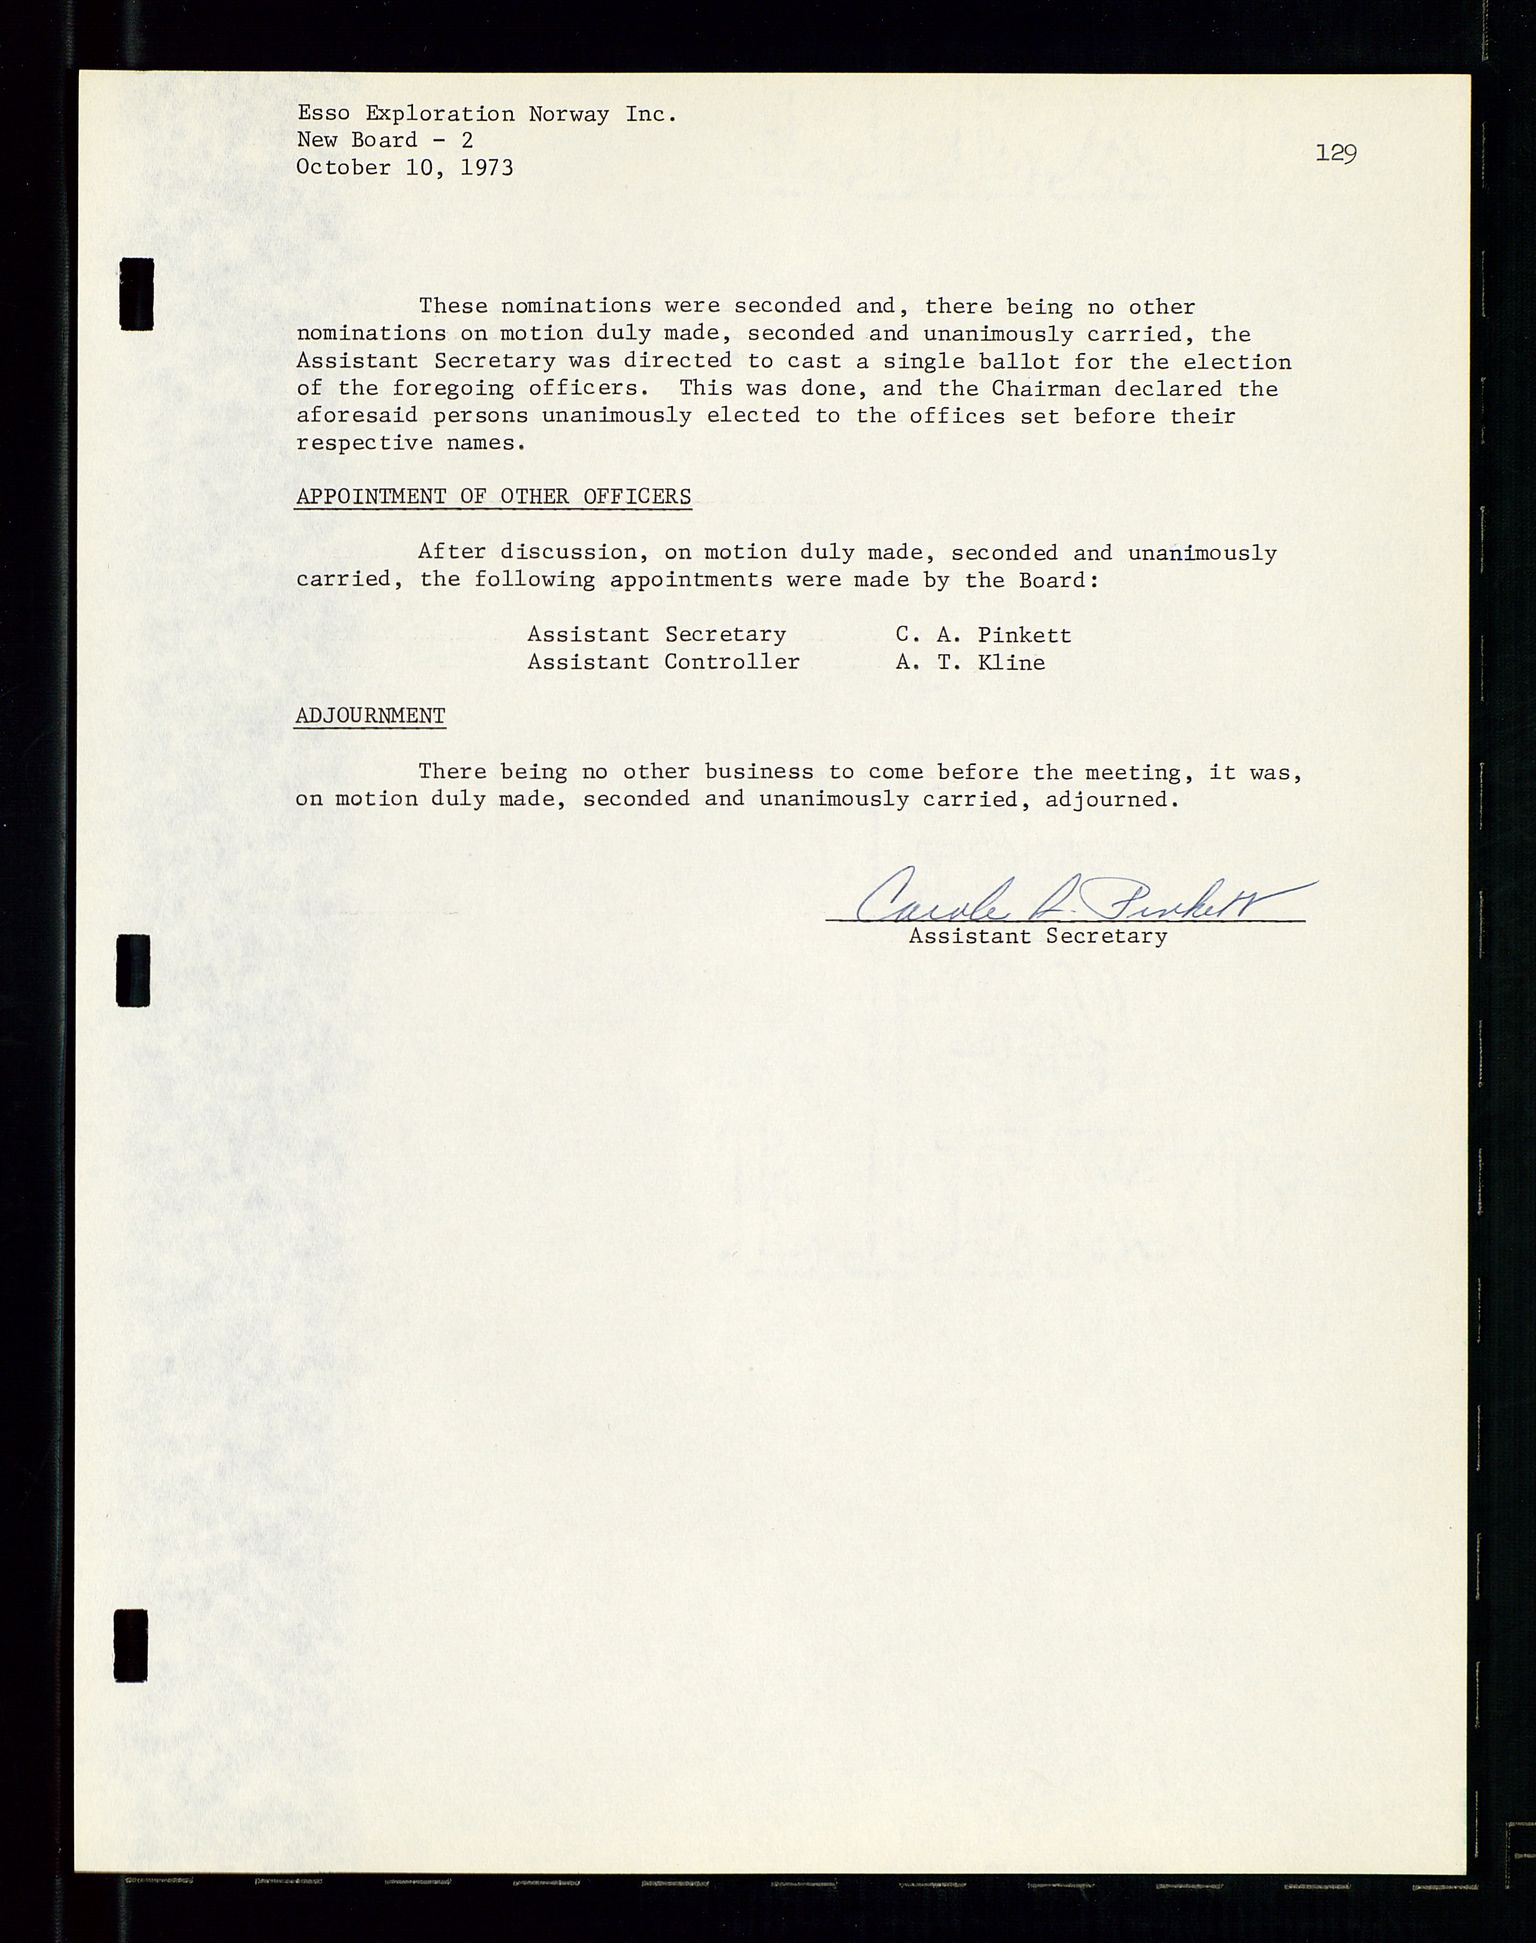 Pa 1512 - Esso Exploration and Production Norway Inc., SAST/A-101917/A/Aa/L0001/0001: Styredokumenter / Corporate records, By-Laws, Board meeting minutes, Incorporations, 1965-1975, p. 129